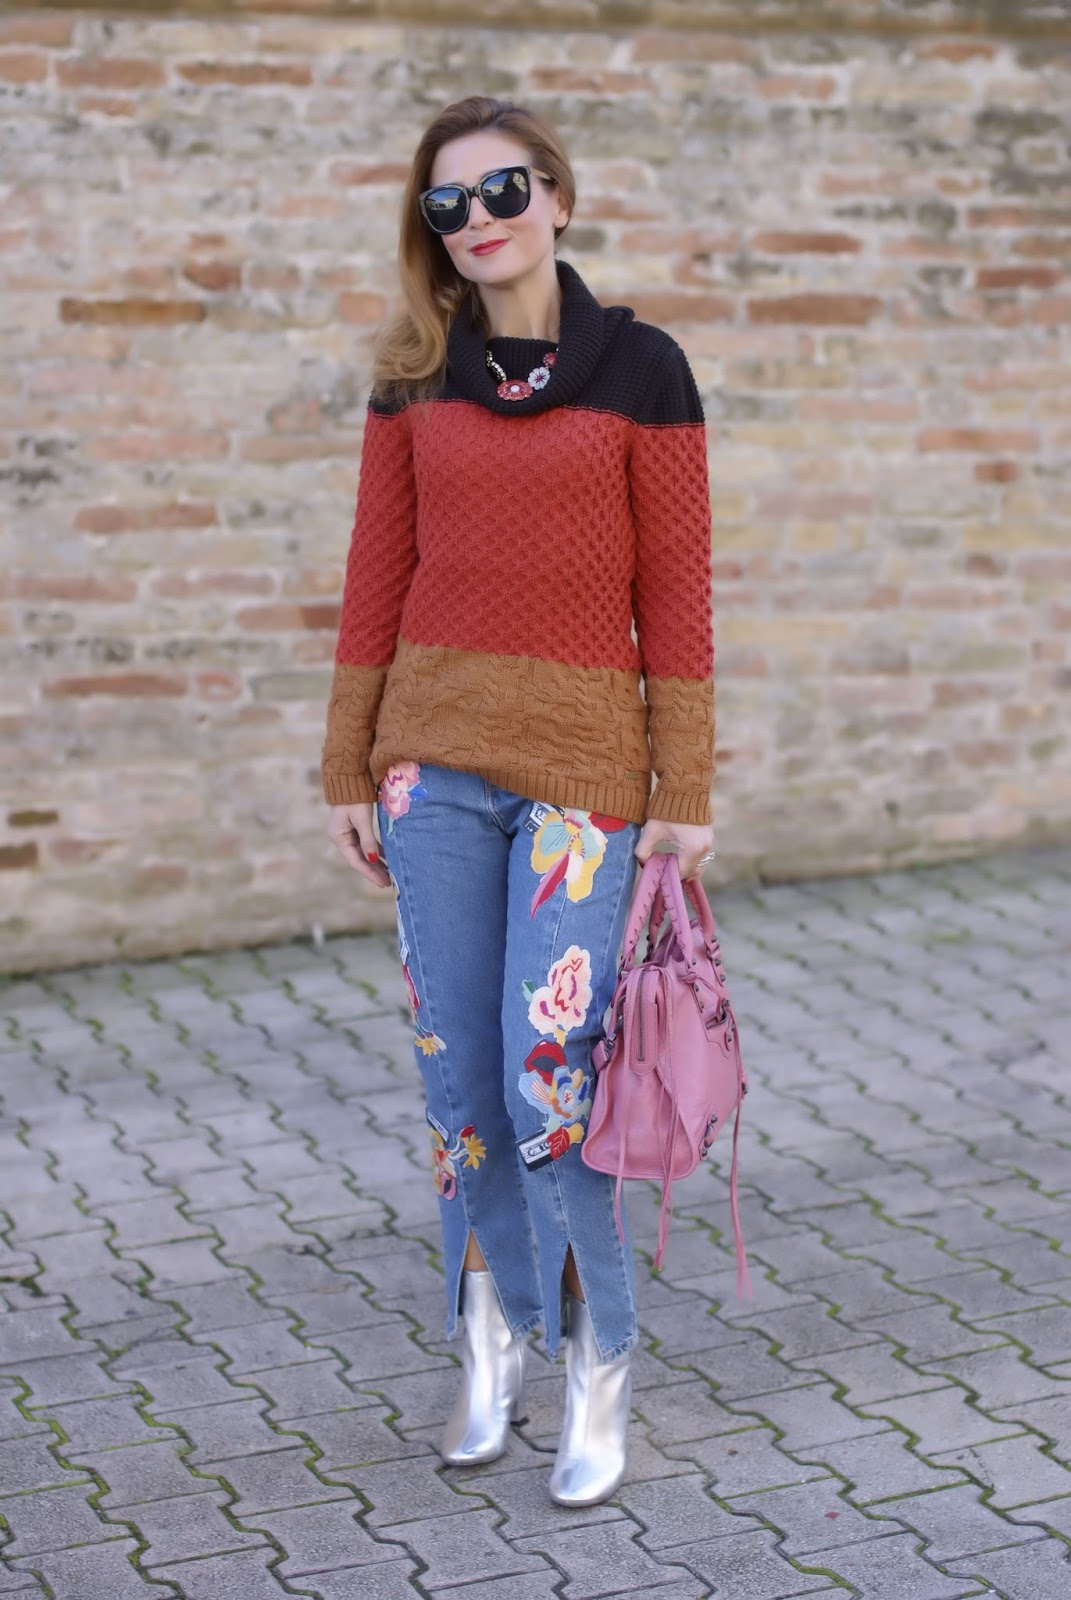 Winter Seventies Fashion with a cozy Smash! sweater and silver ankle boots on Fashion and Cookies fashion blog, fashion blogger style